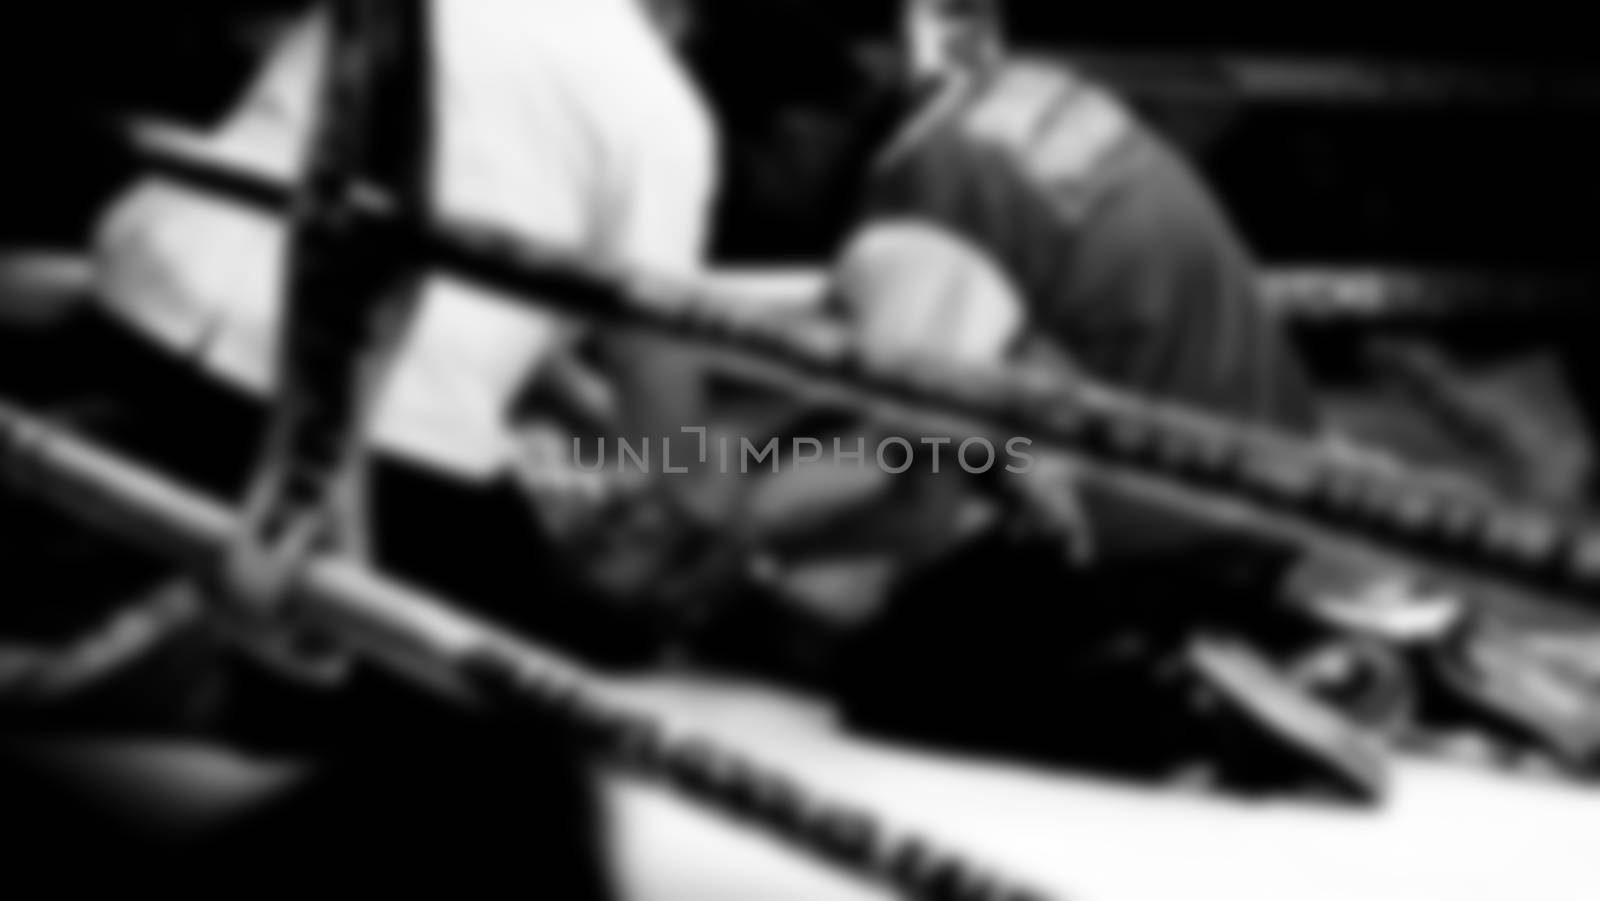 Blurred images black and white photo style of Thai boxing or Muay Thai or Kickboxing which local and foriegn boxer are fighting on the ring at indoor stadium stage as a martial art sport competition for traveller sightseeing